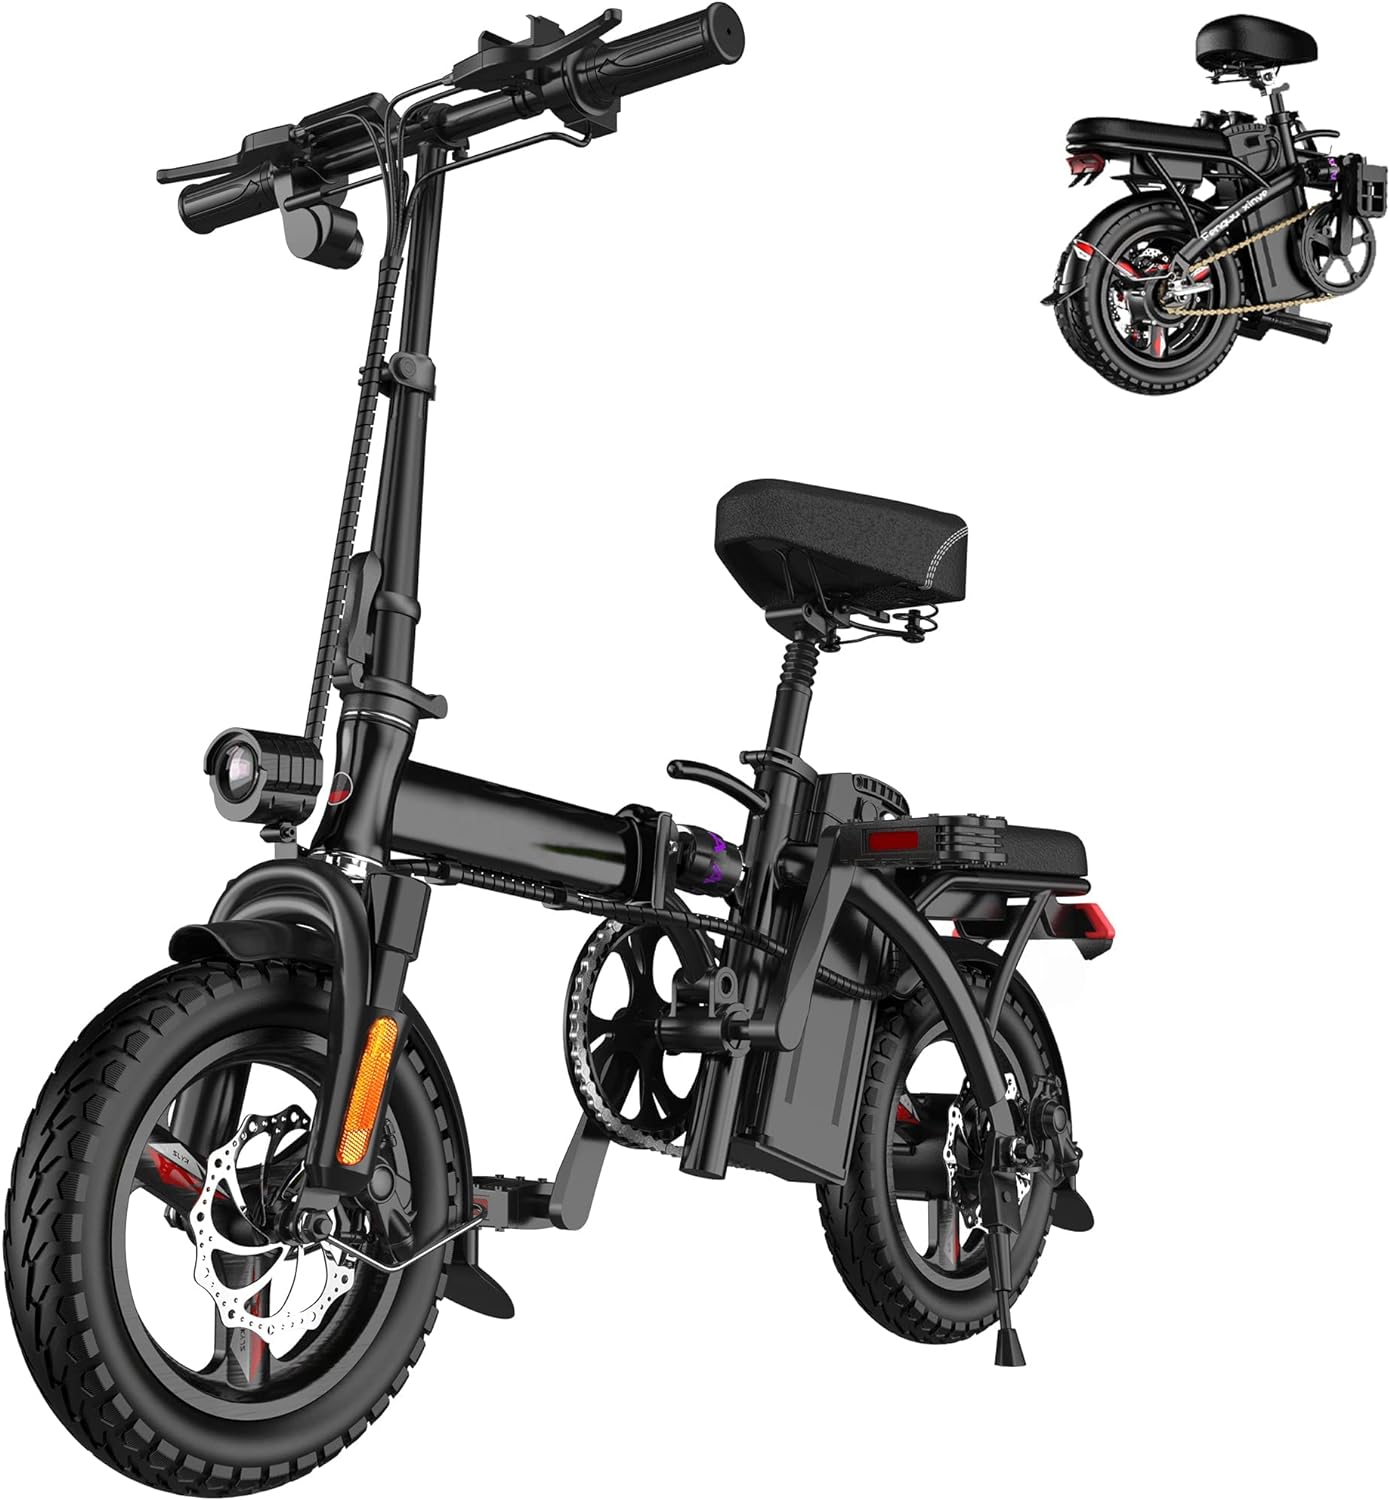 ebkarocy-ebikes-for-adults-400w-motor-22mph-max-speed-14-tire-48v-15ah-removable-battery-for-electric-bike-multi-shock-a